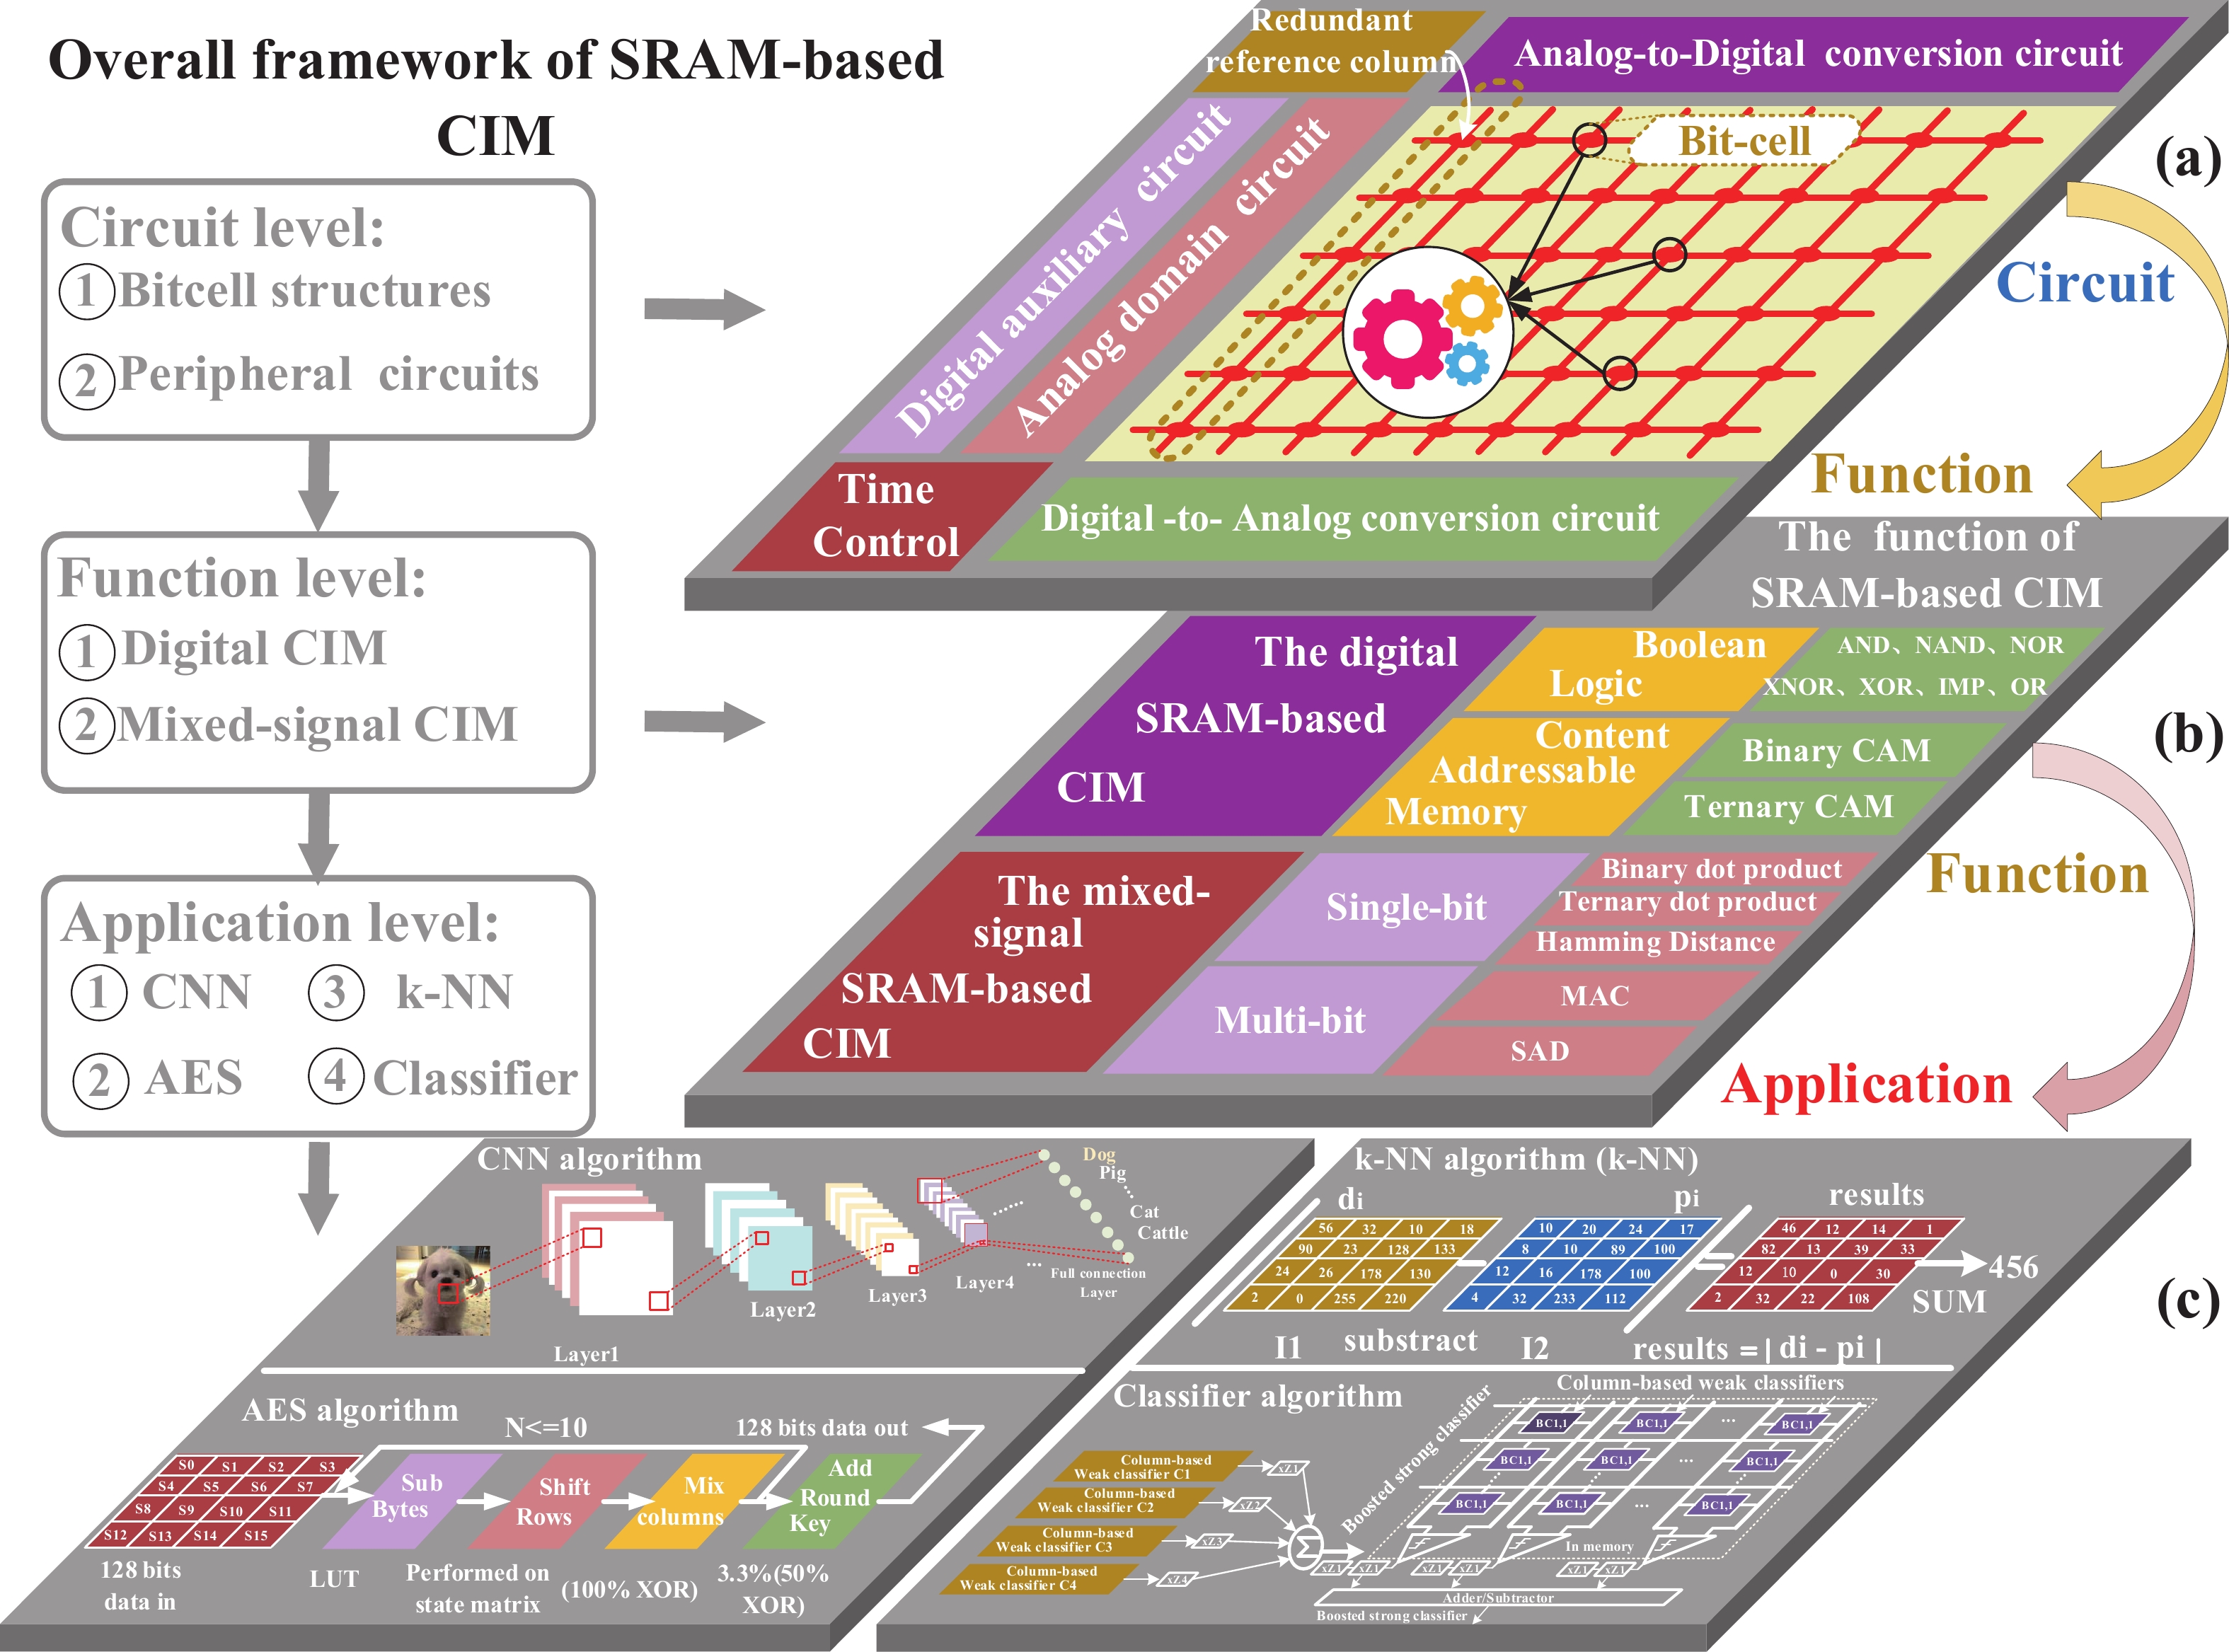 (Color online) Overall framework of static random-access memory (SRAM)-based computing in-memory (CIM) for the review: (a) various functions implemented in CIM, (b) operation functions realizable with CIM, and (c) application scenarios of CIM.